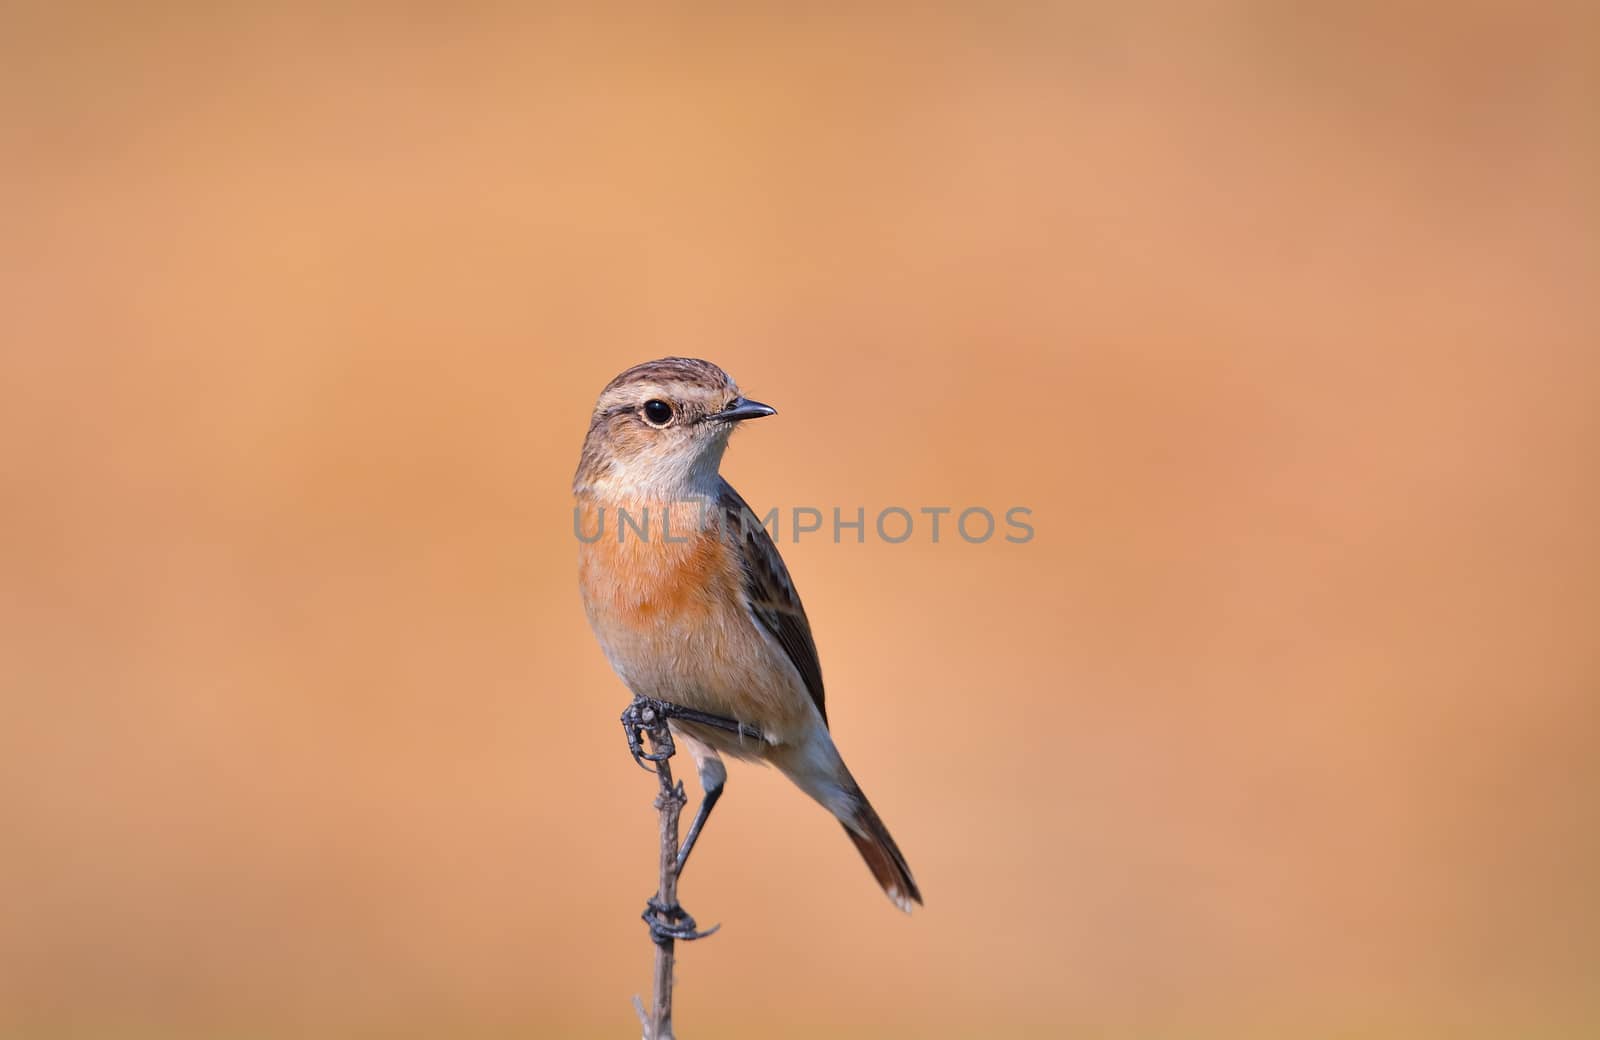 Siberian stone chat sitting on a edge of dry branch by rkbalaji